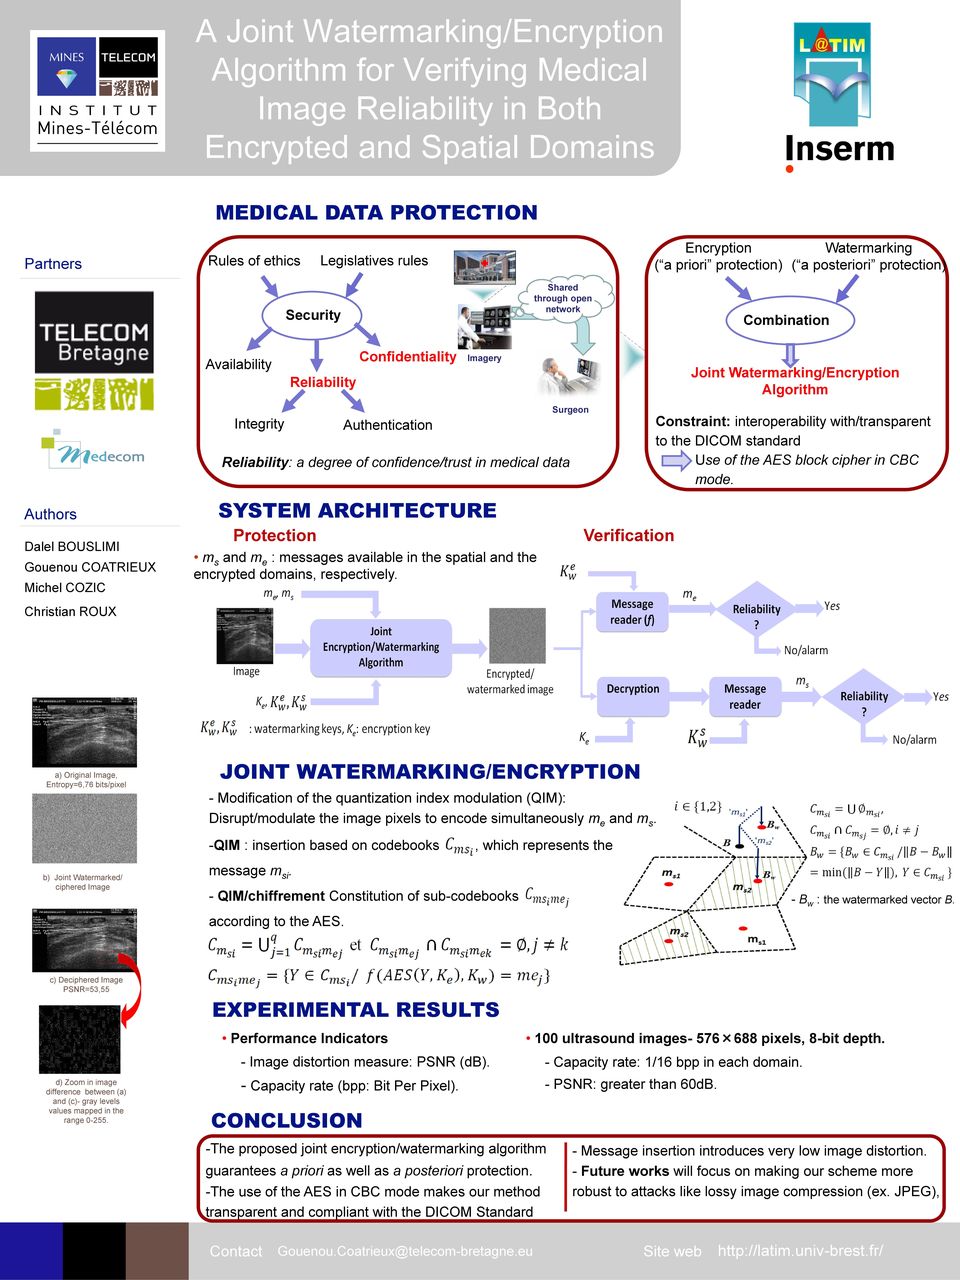 Reliability: a degree of confidence/trust in medical data Joint Watermarking/Encryption Algorithm Constraint: interoperability with/transparent to the DICOM standard Use of the AES block cipher in